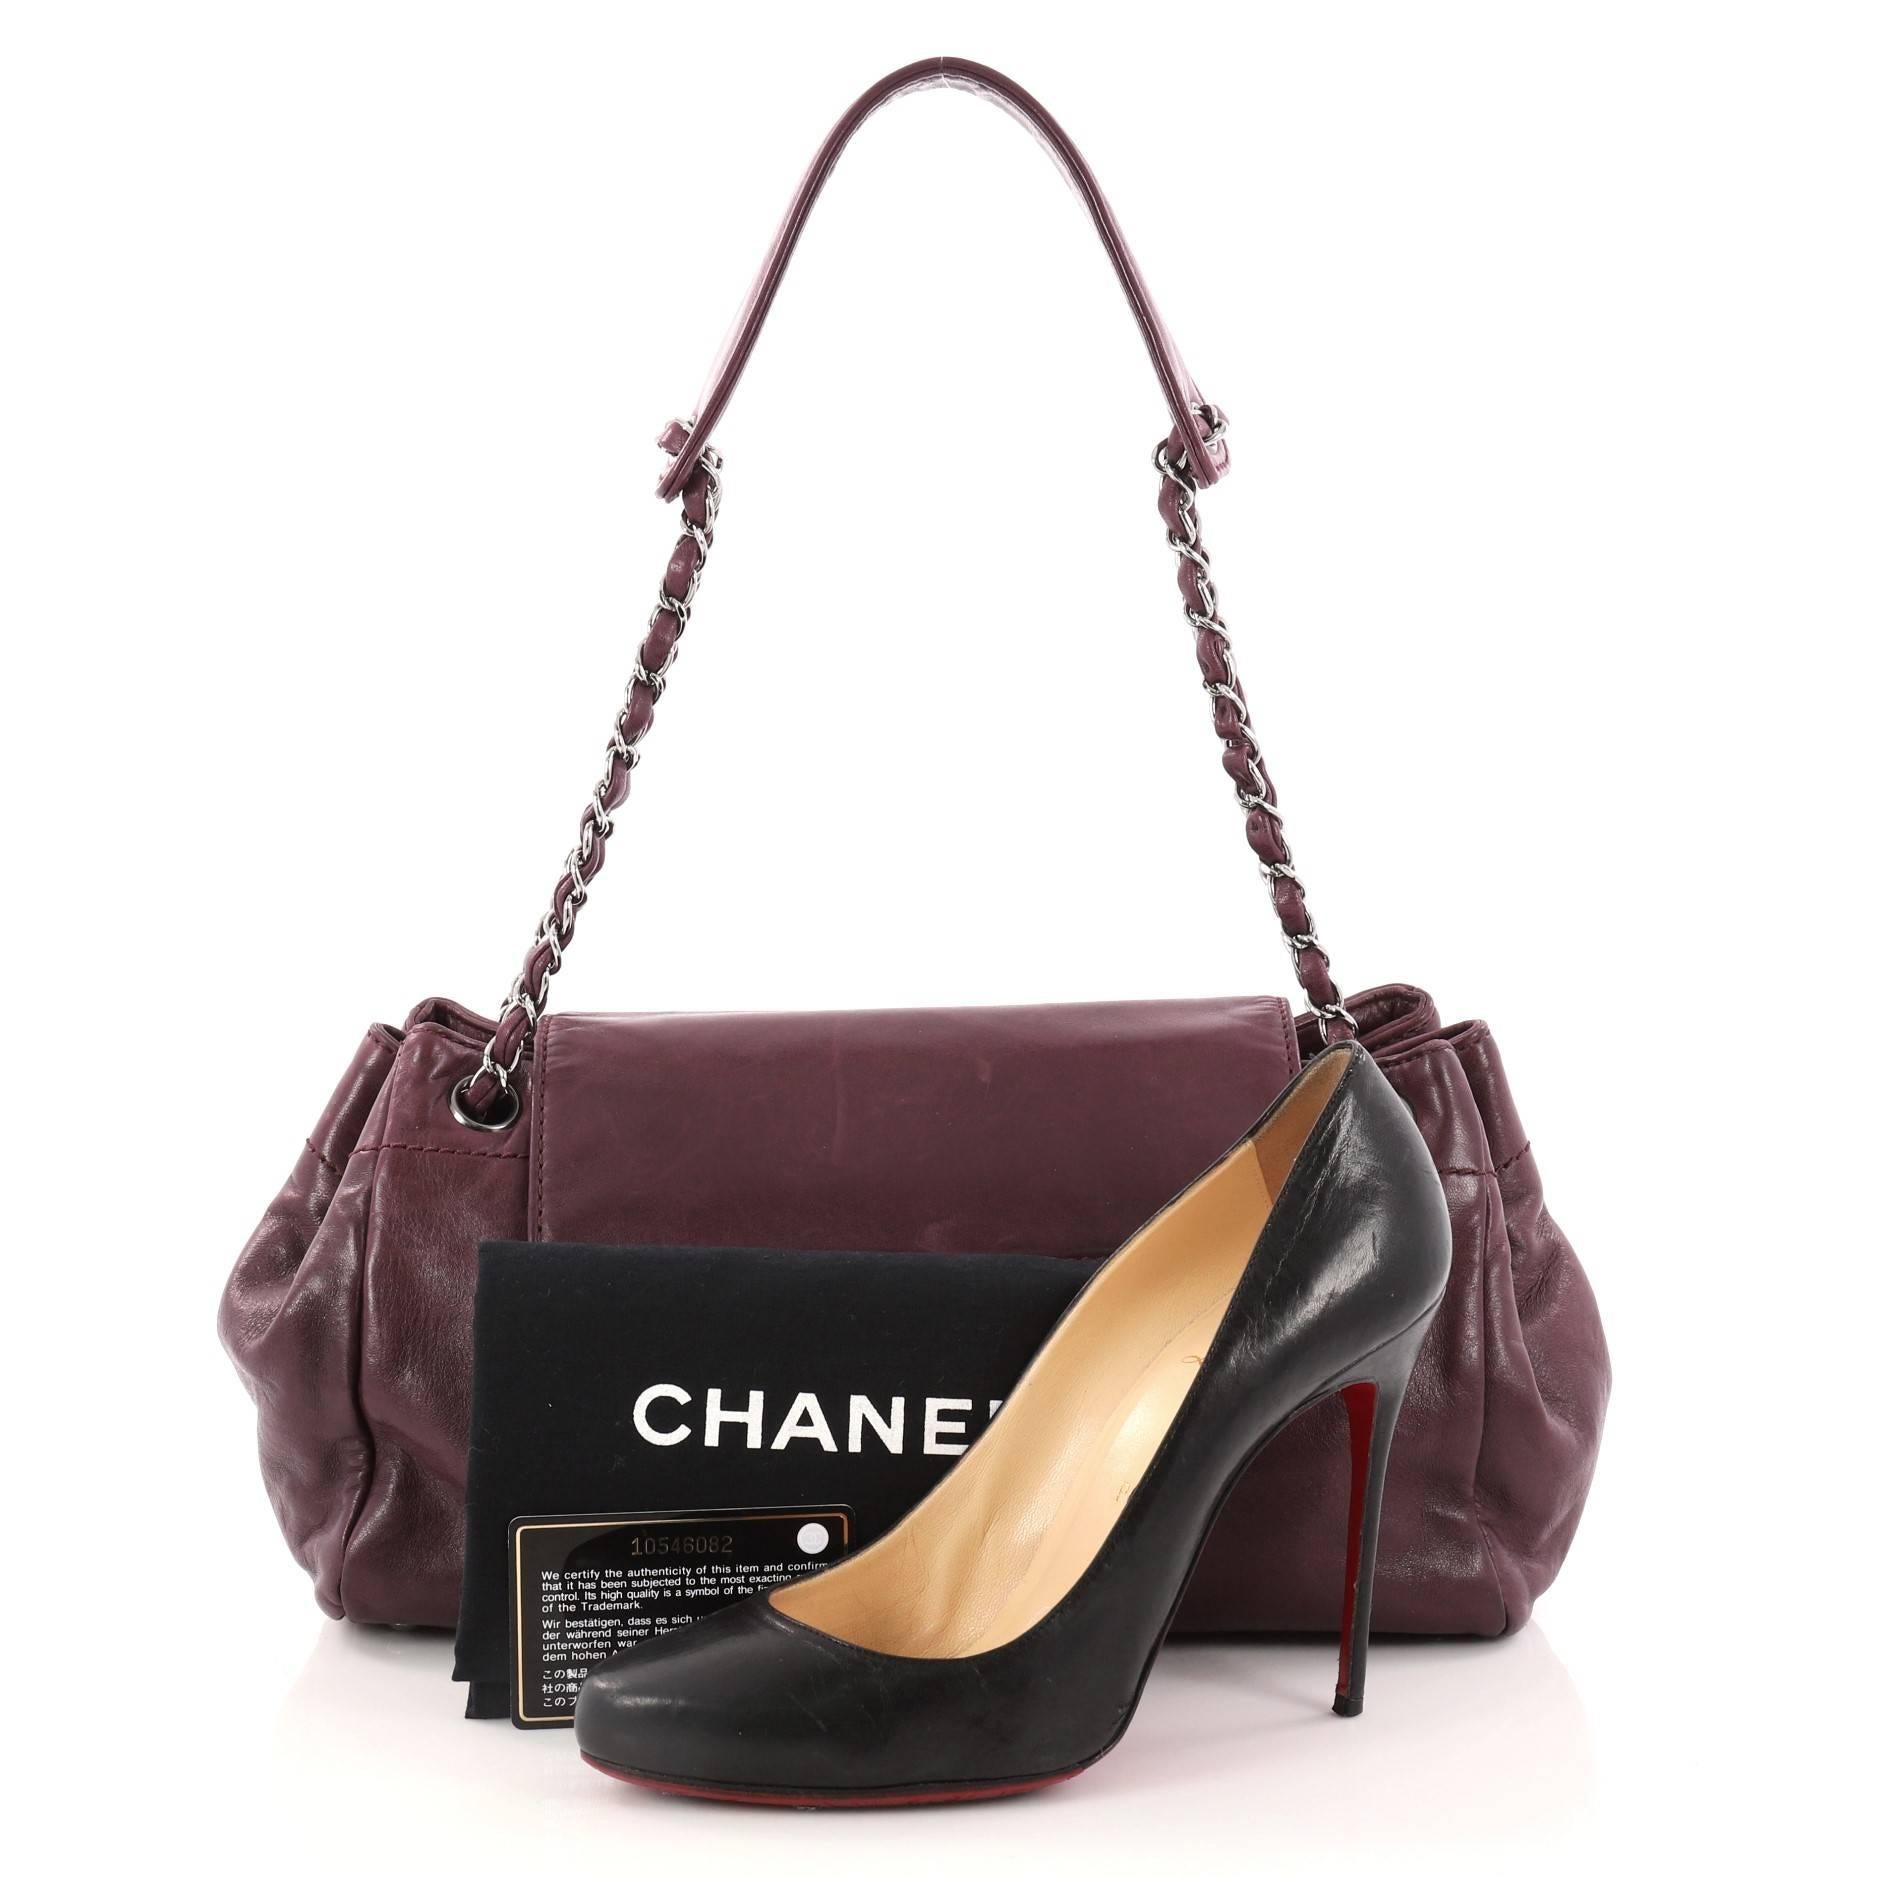 This authentic Chanel Lax Accordion Flap Bag Leather Medium is ideal for everyday escapades. Crafted from purple leather, this gorgeous shoulder bag features woven-in leather chain straps with leather pad that cinches the exterior side pockets,